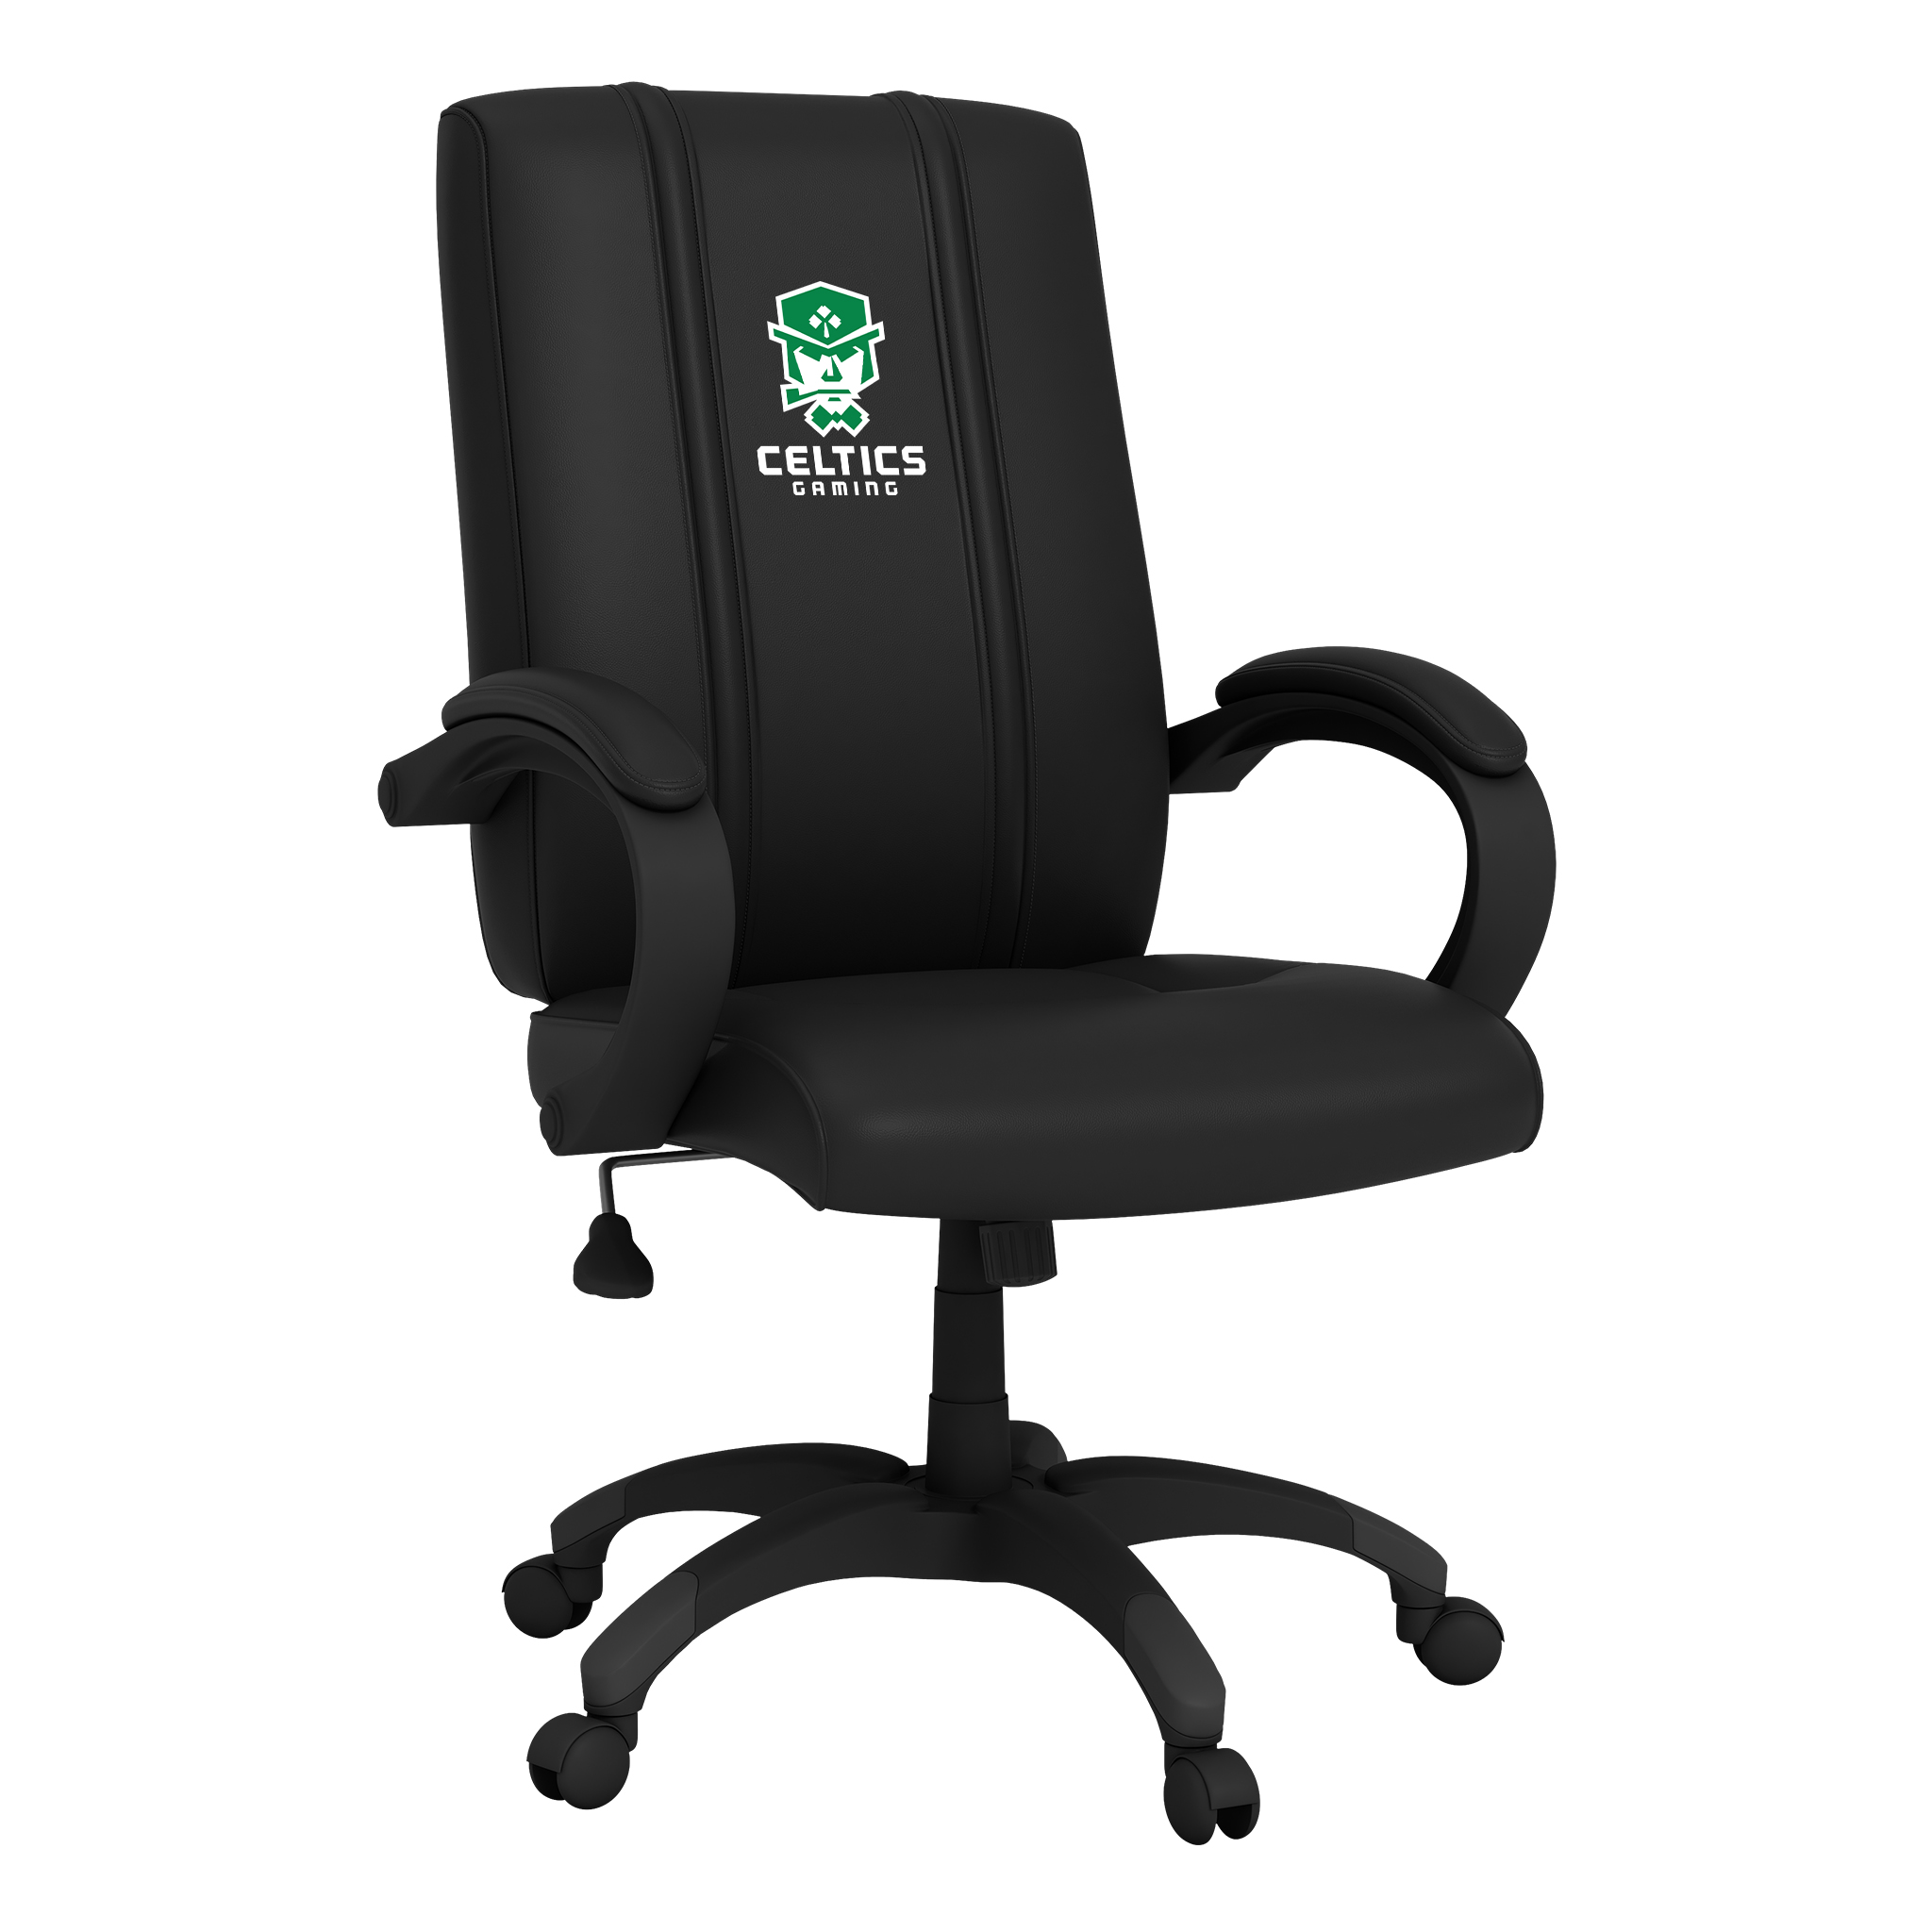 Boston Celtics Office Chair 1000 with Celtics Crossover Gaming Primary